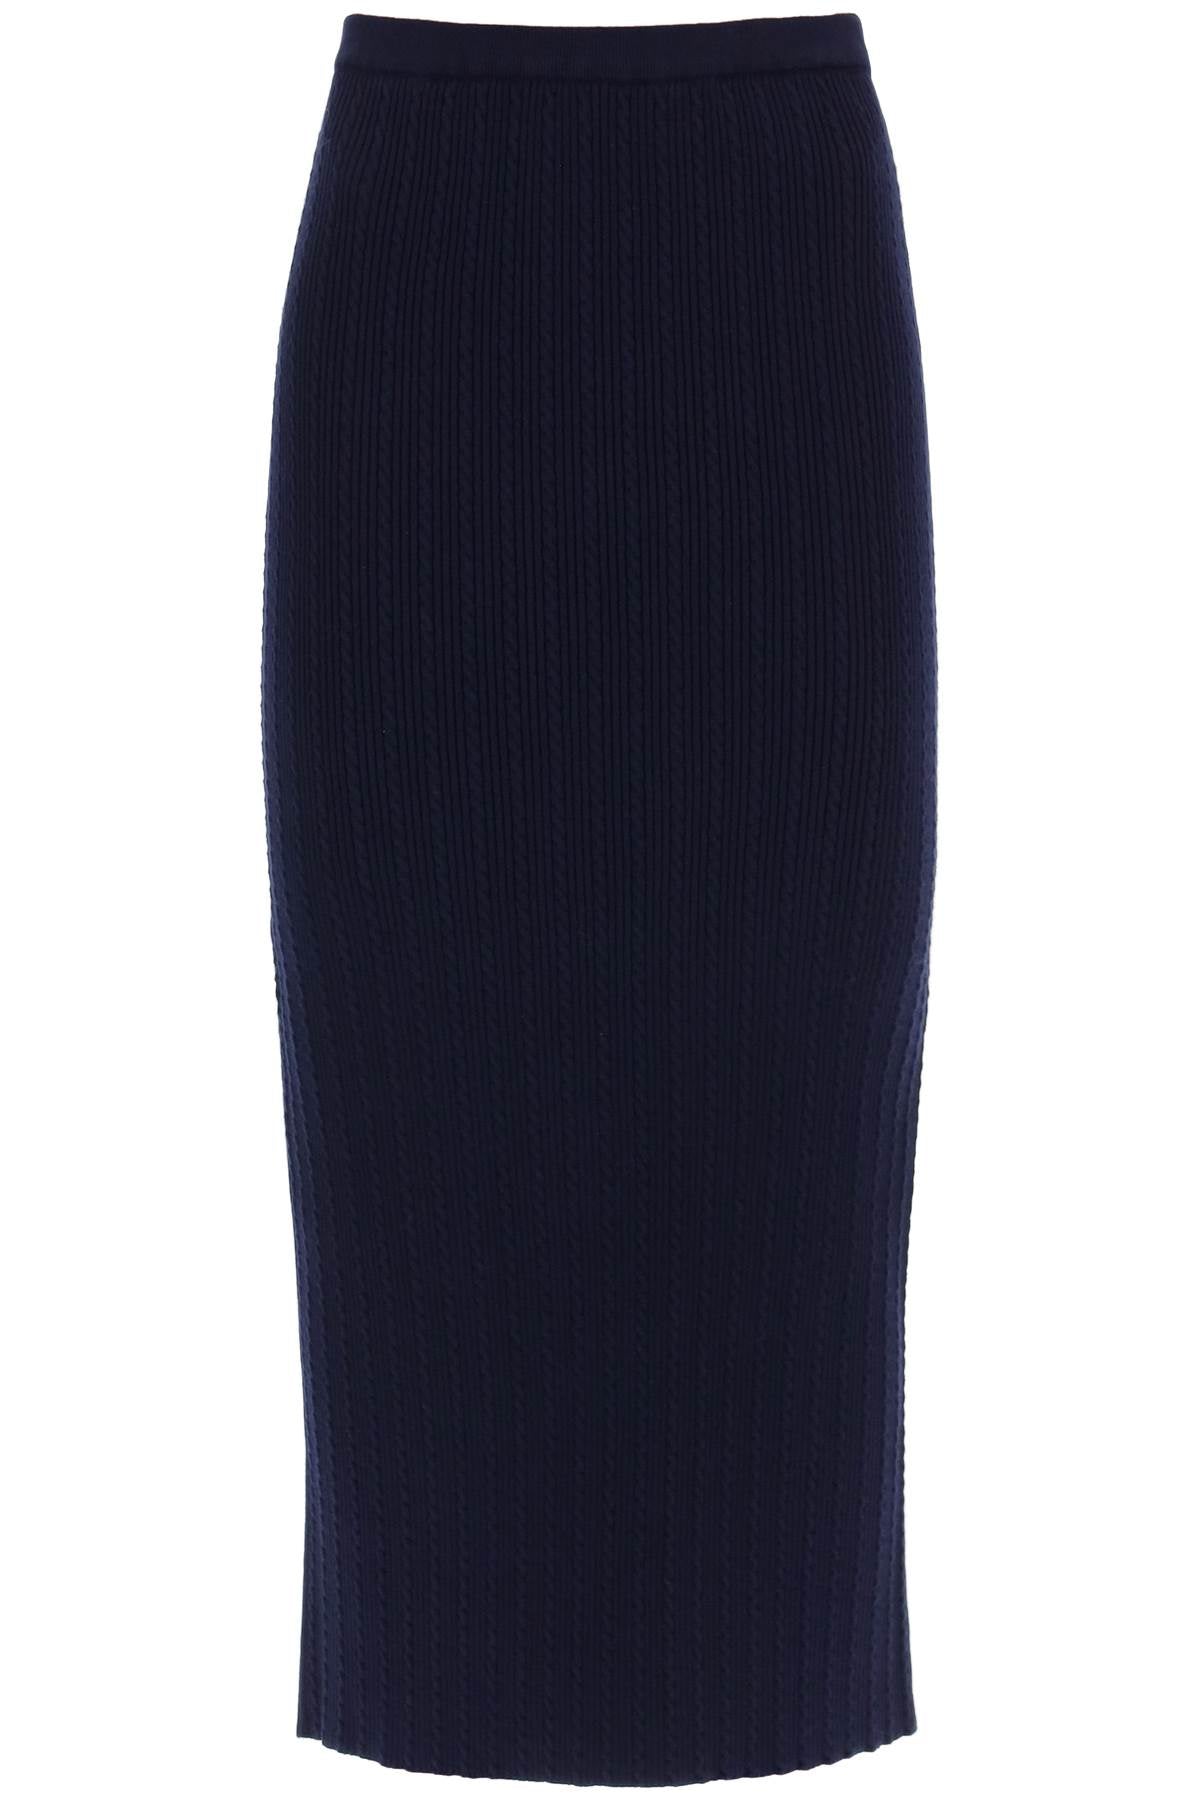 Alessandra rich knitted pencil skirt-0